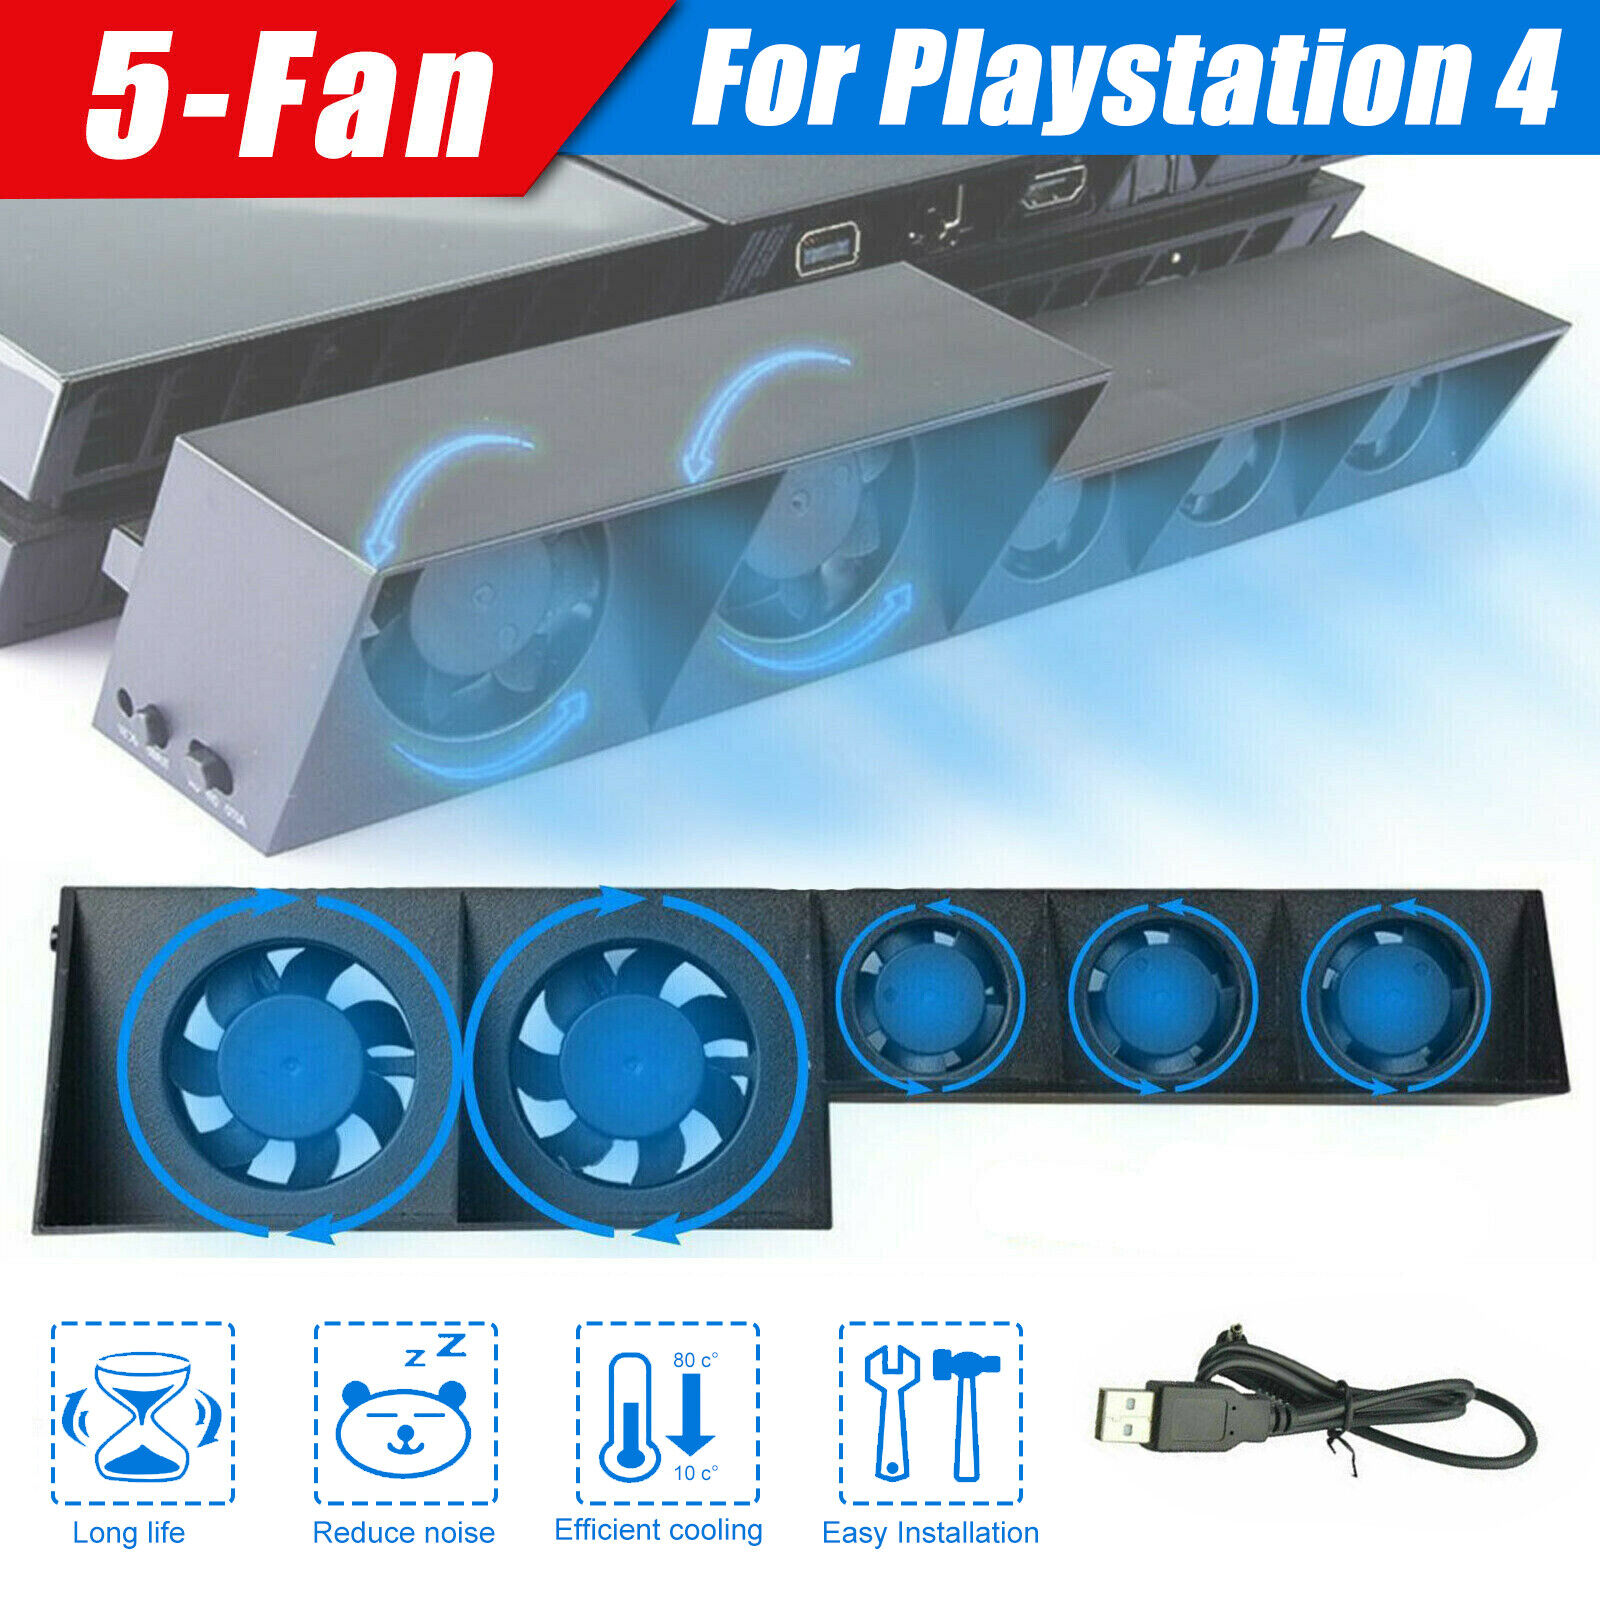 External Cooling Fan Cooler Game Accessories For PS4 PlayStation 4 Host Console